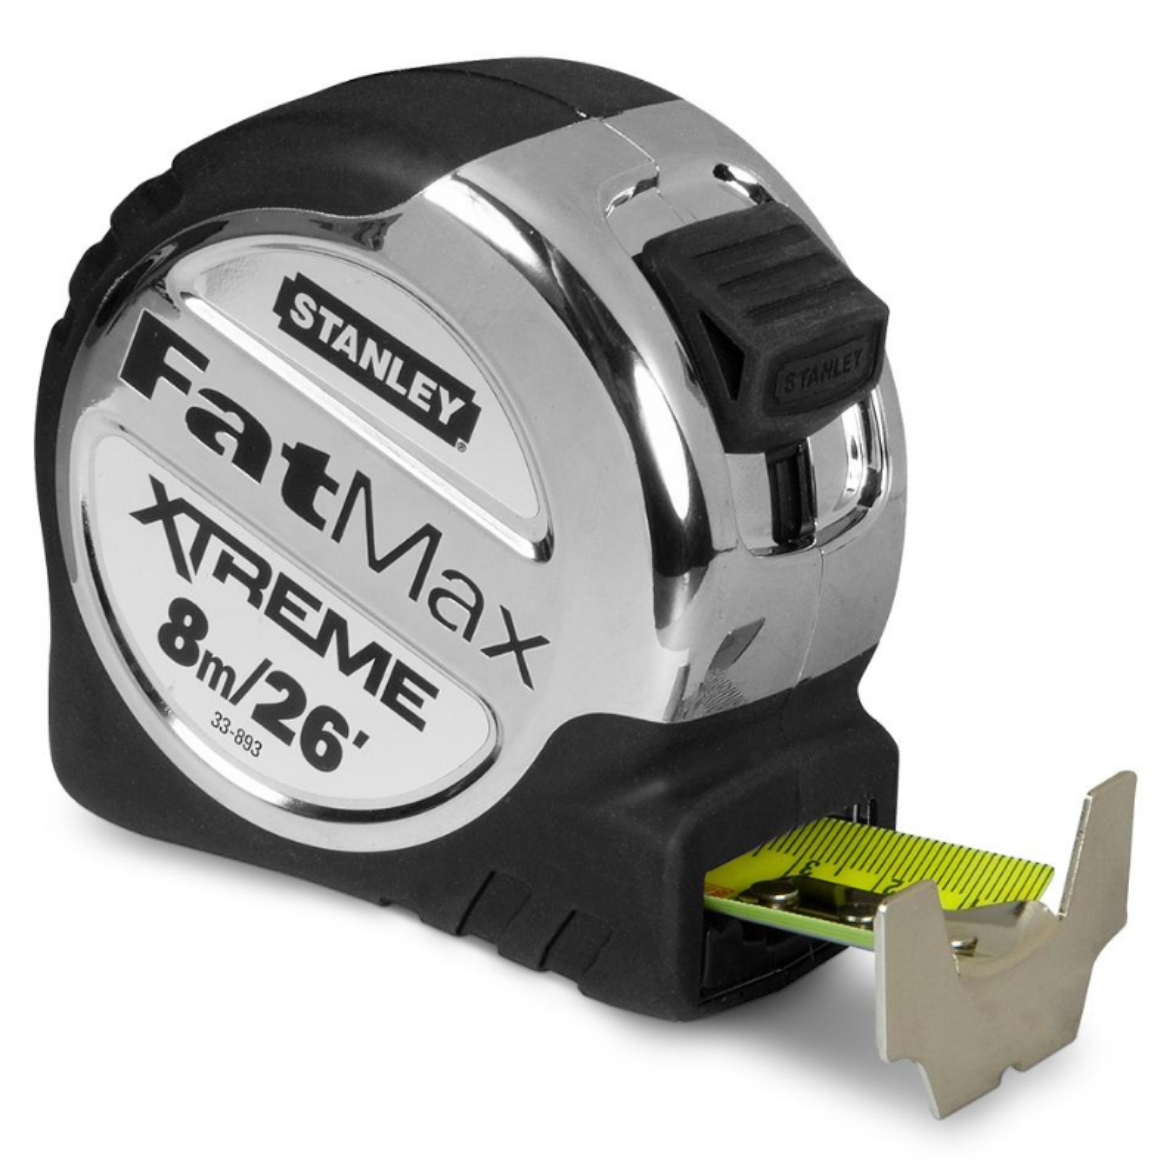 Picture of FatMax 8m/26'x32mm Pro Xtreme Tape Measure